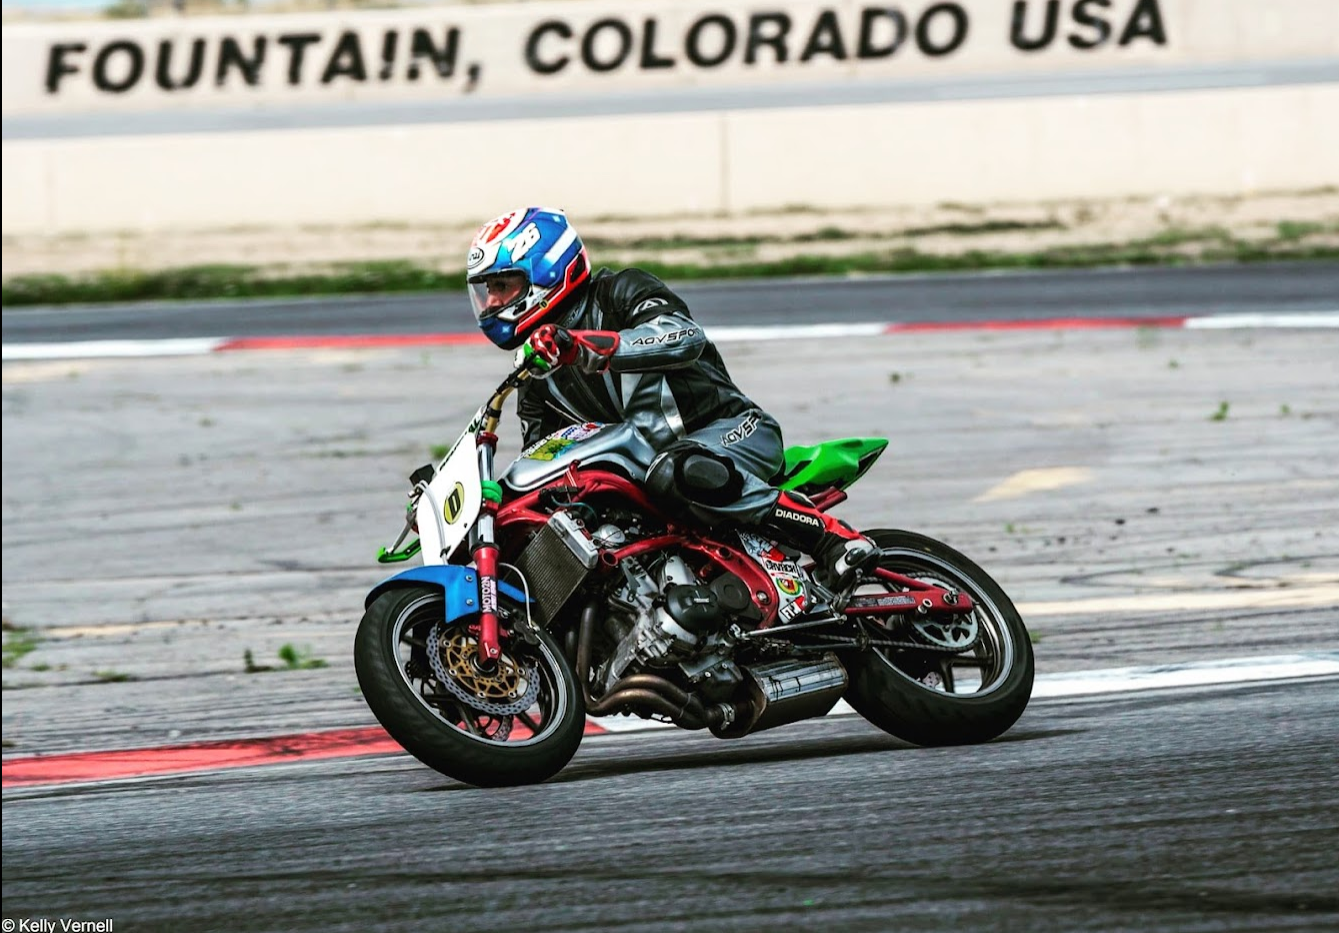 Aston on his Ninja 650 at PPIR. The bike has a blue front fender that matches his helmet and a green tail section.